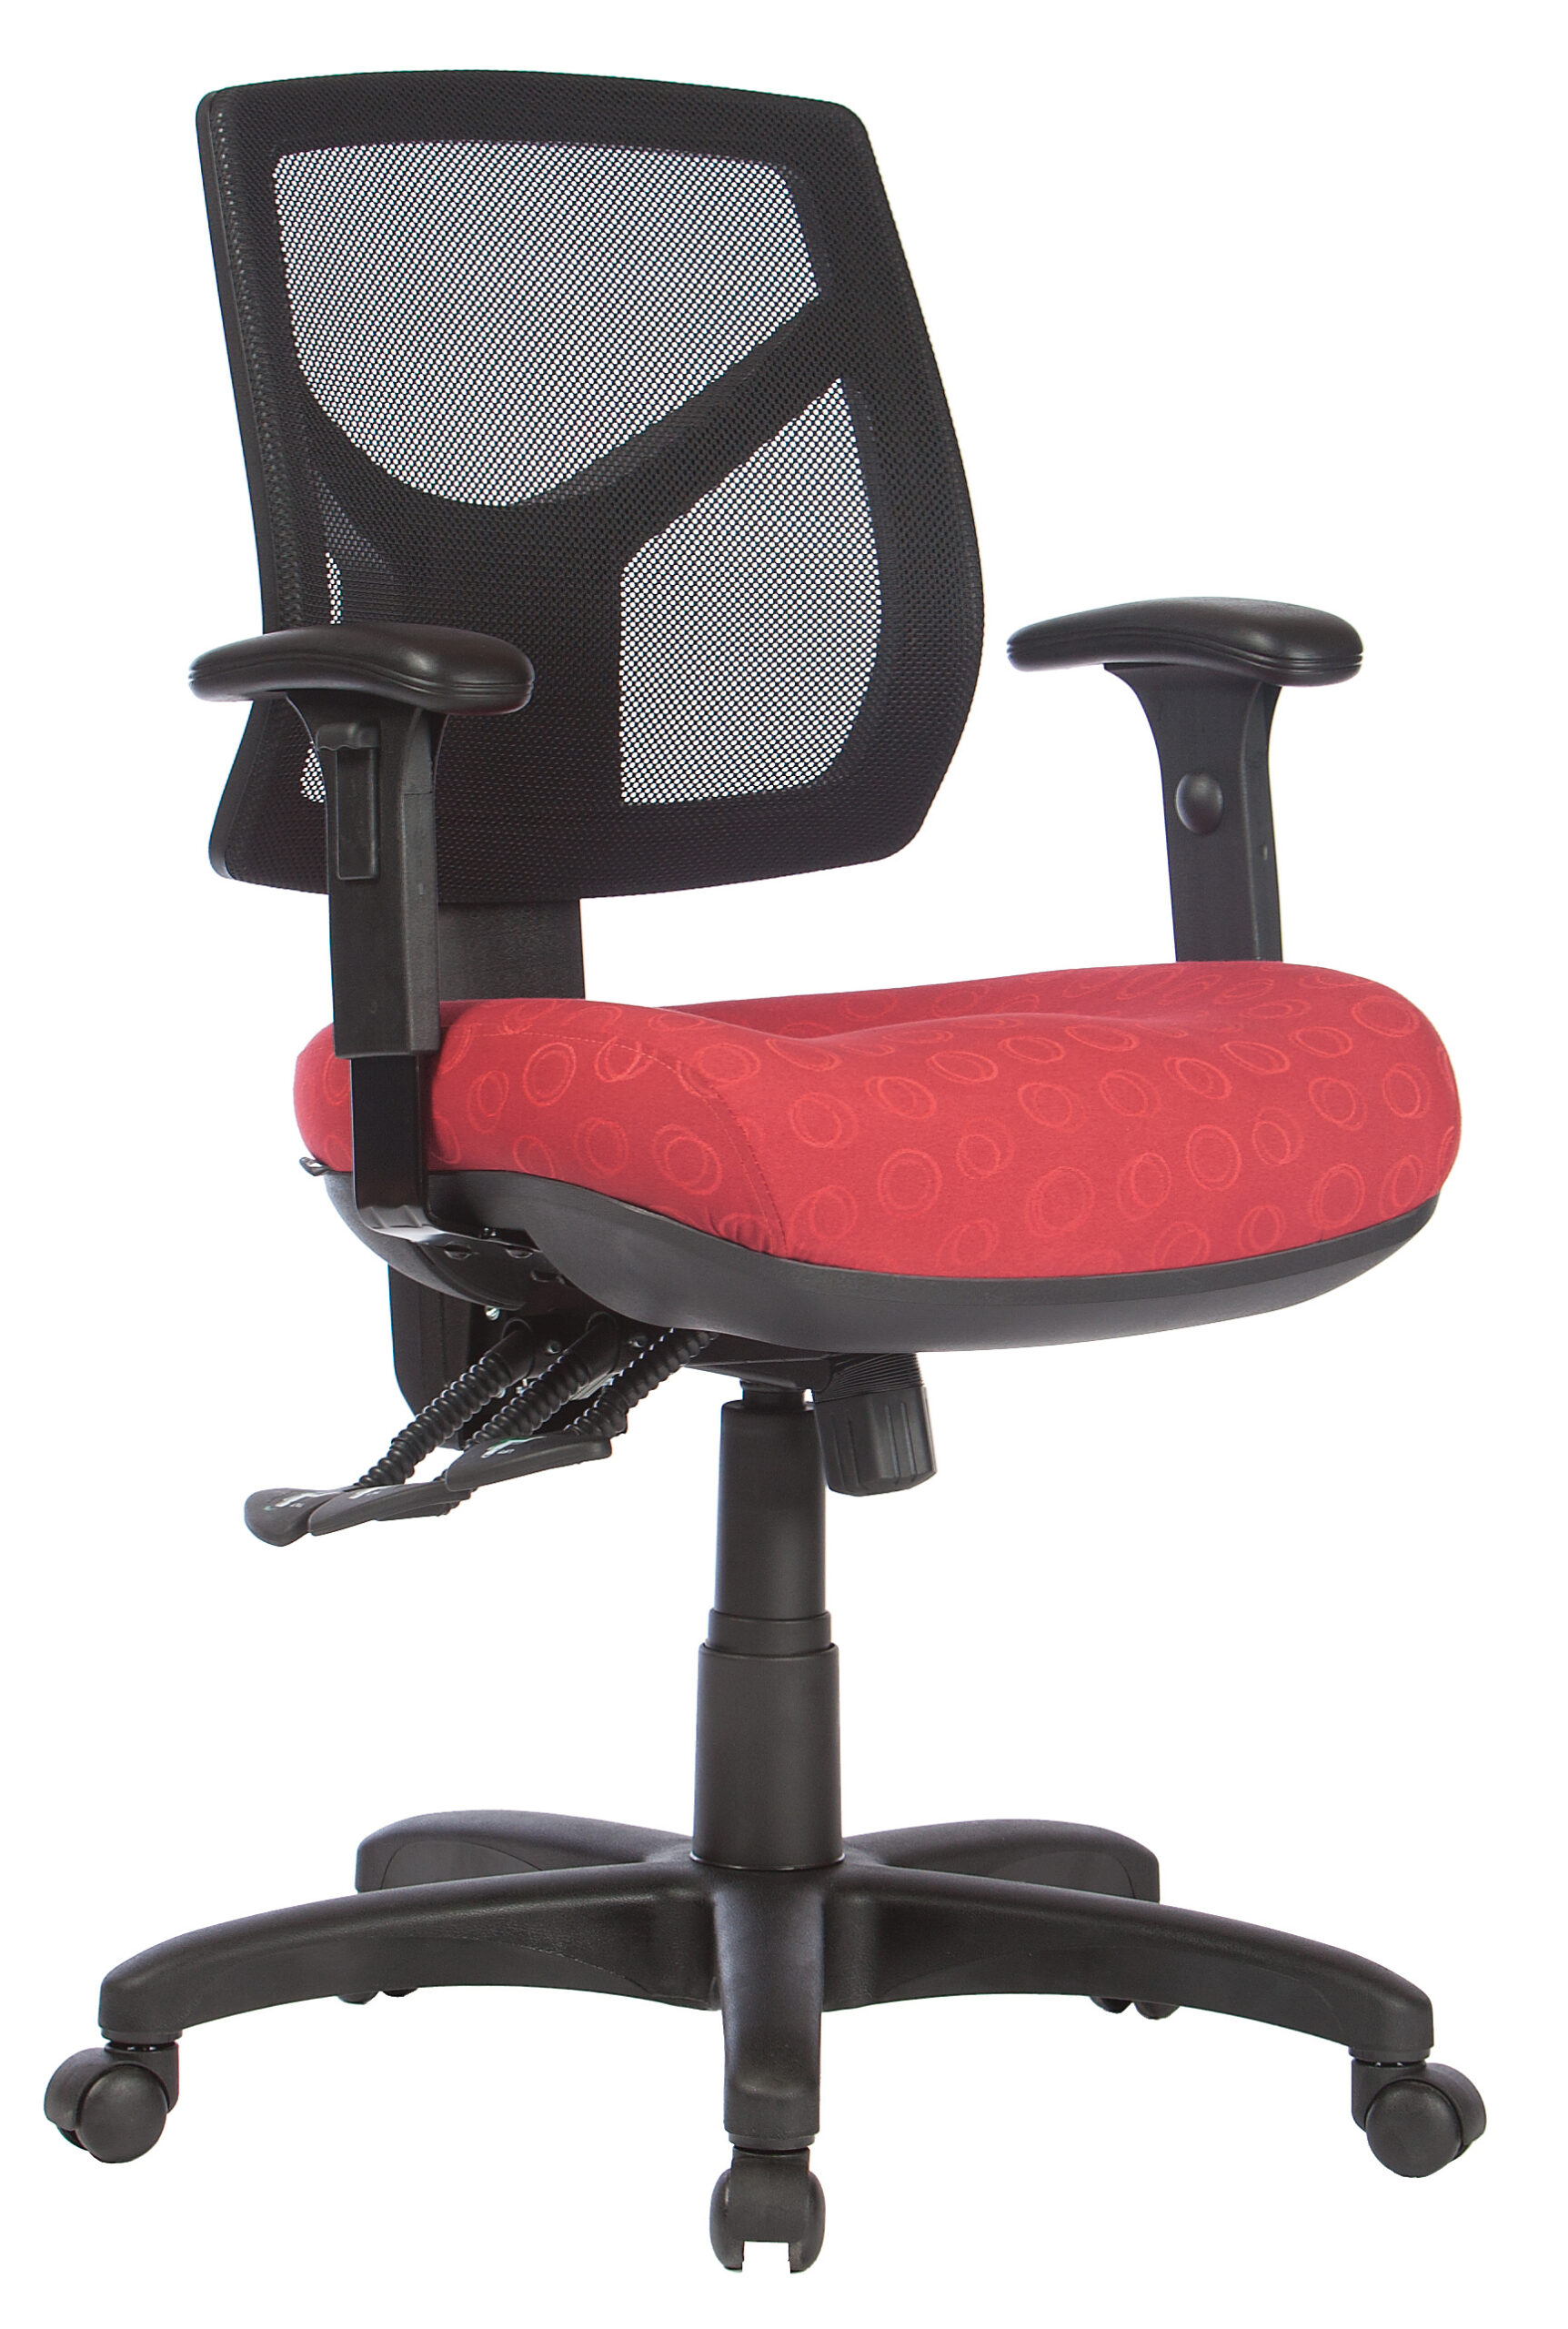 Chelsea 3 Lever High Mesh Back Big Boy Seat Task Chair With Arms